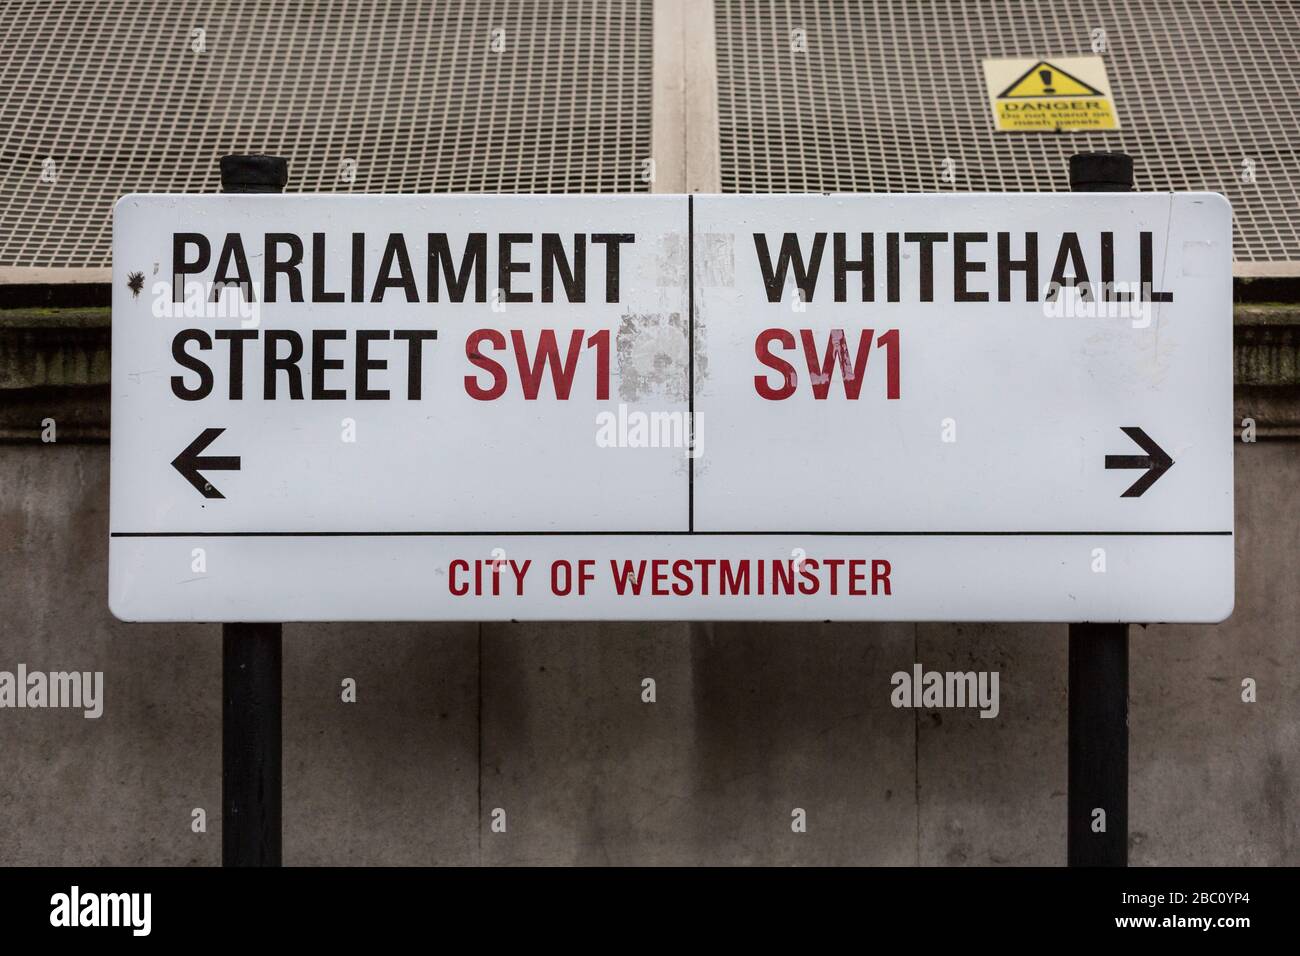 Parliament Street and Whitehall, SW 1 City of Westminster road street sign, London, UK Stock Photo